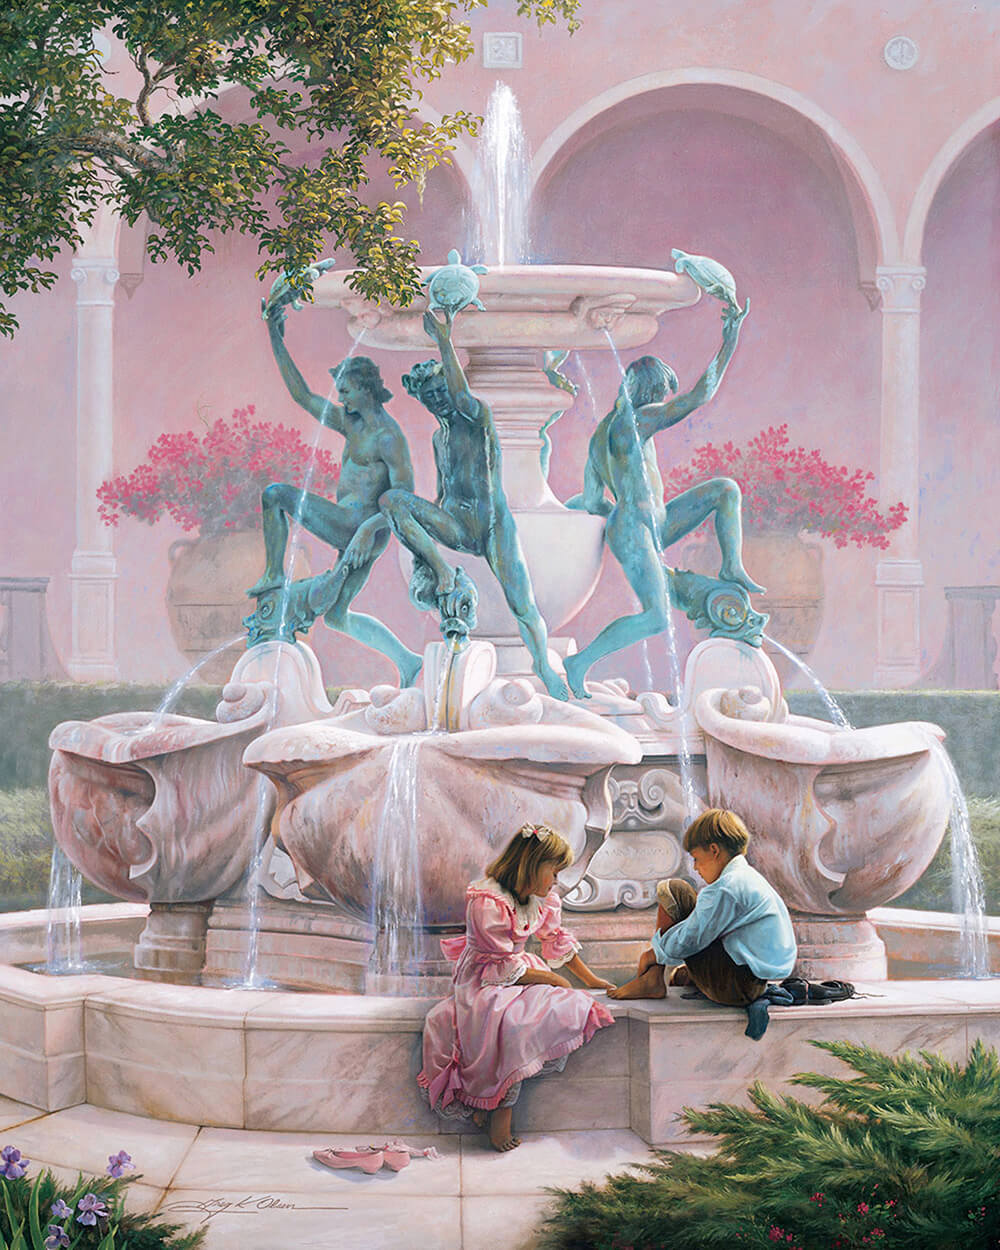 Fountains of My Youth